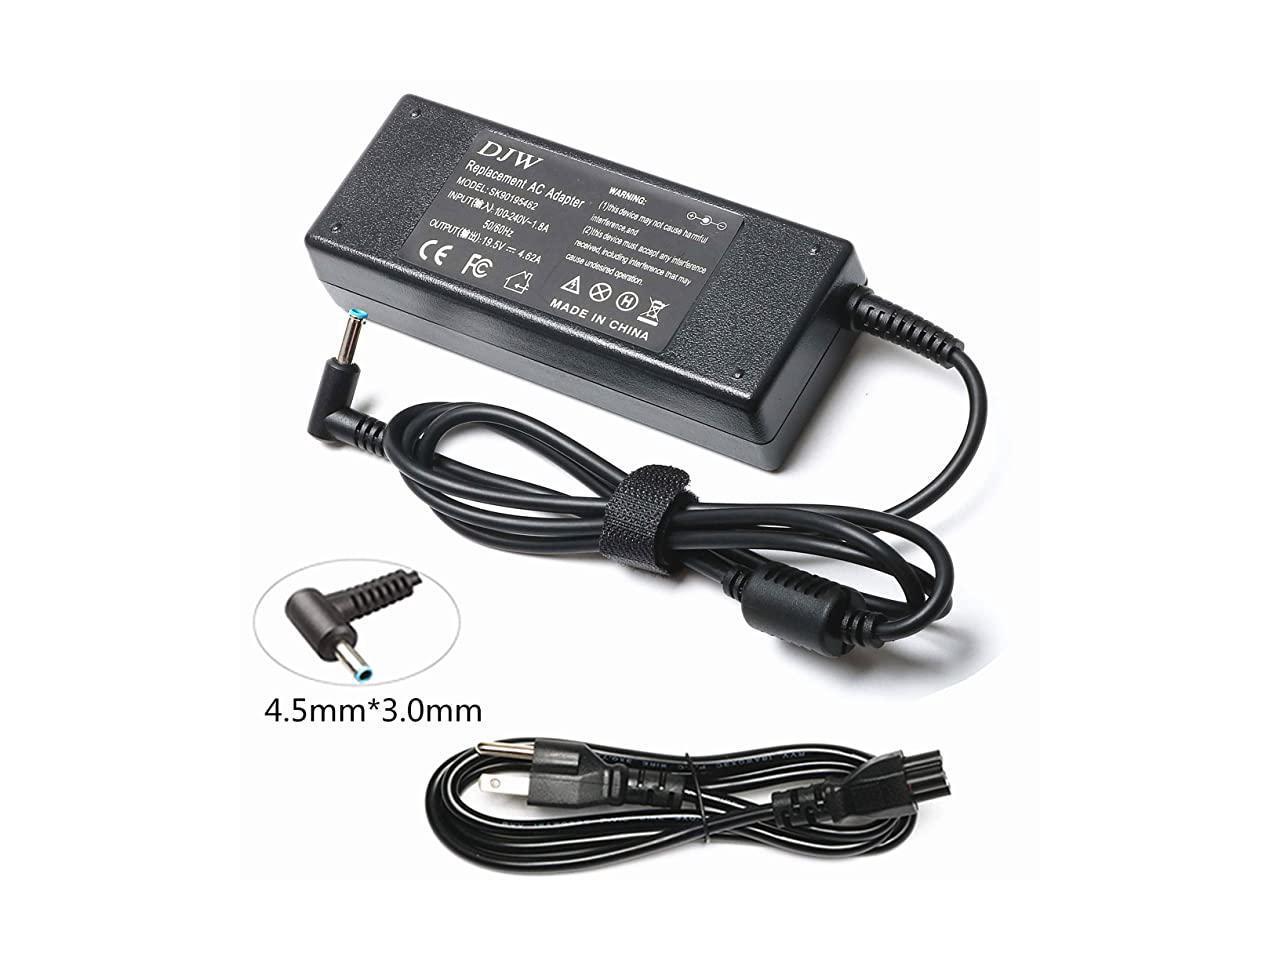 3.0mm - 4.5mm --12 Months Warranty DJW 19.5V 4.62A 90W AC Laptop Adapter Charger For HP Envy Touchsmart Sleekbook 15 17 M6 M7 Series; HP Pavilion 11 14 15 17 HP Stream 11 13 14 